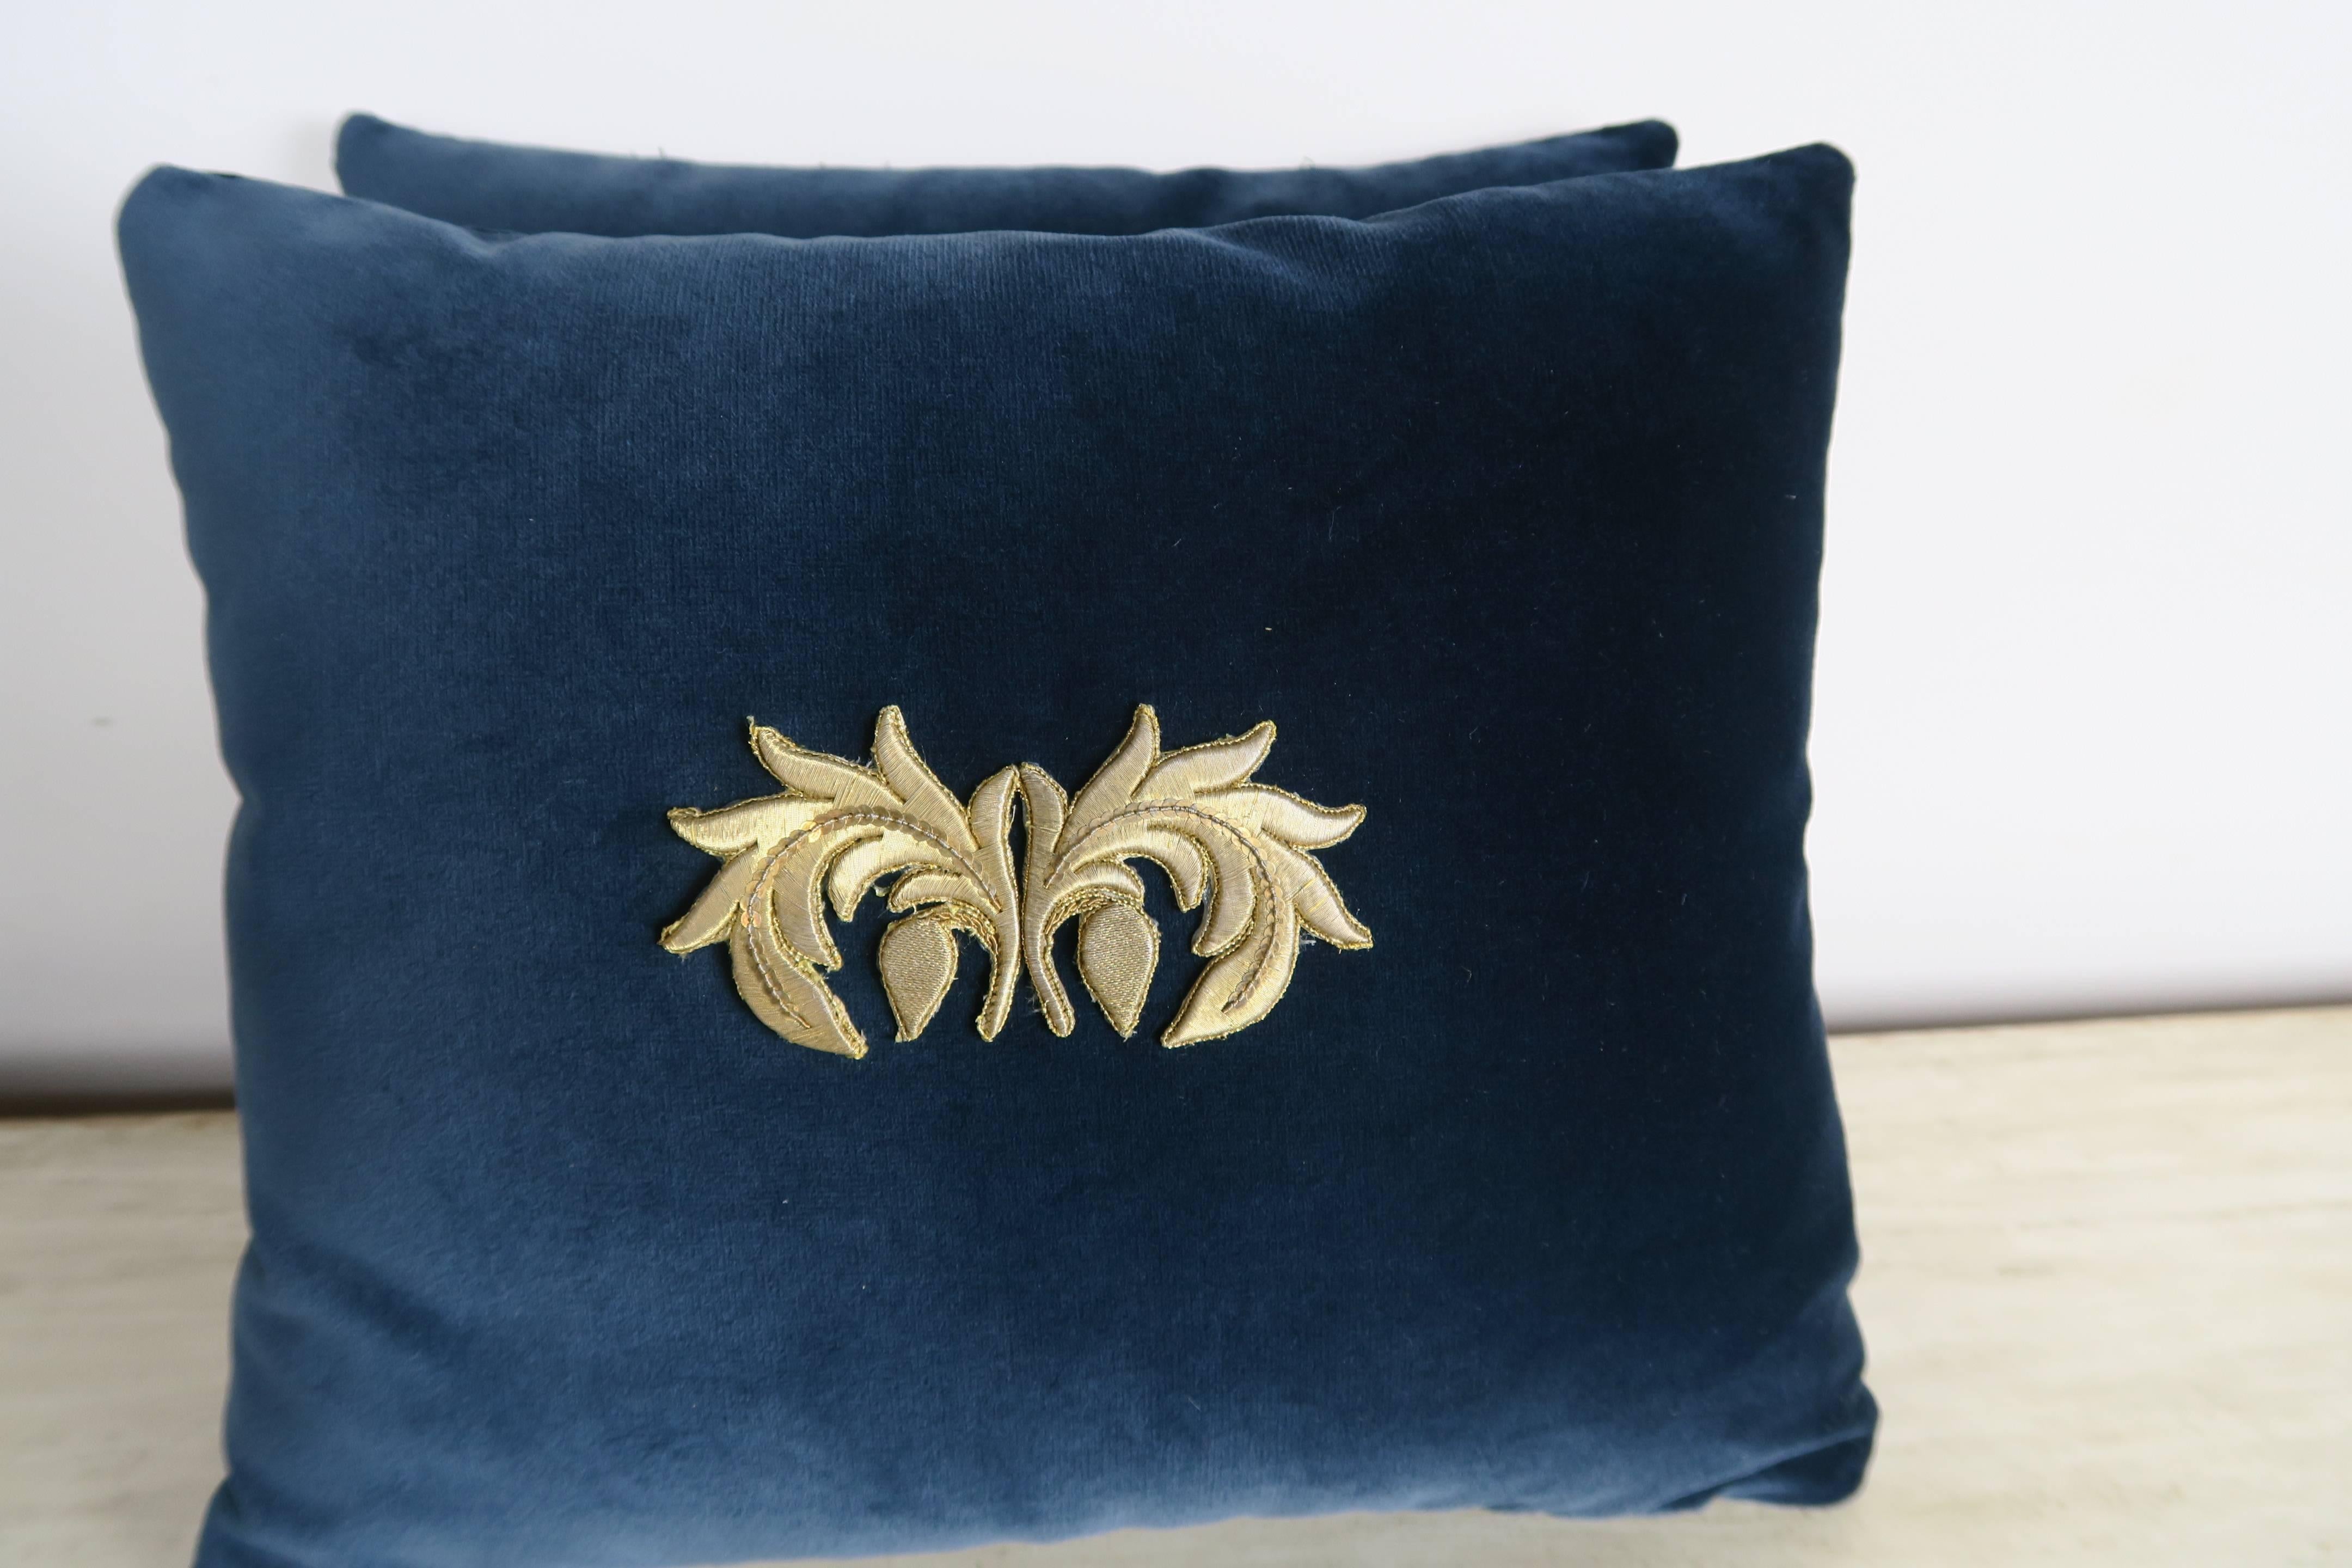 Pair of custom pillows by Melissa Levinson made with 19th century gold metallic appliques attached to midnight colored silk velvet fronts and backs. Down inserts, zipper closures.